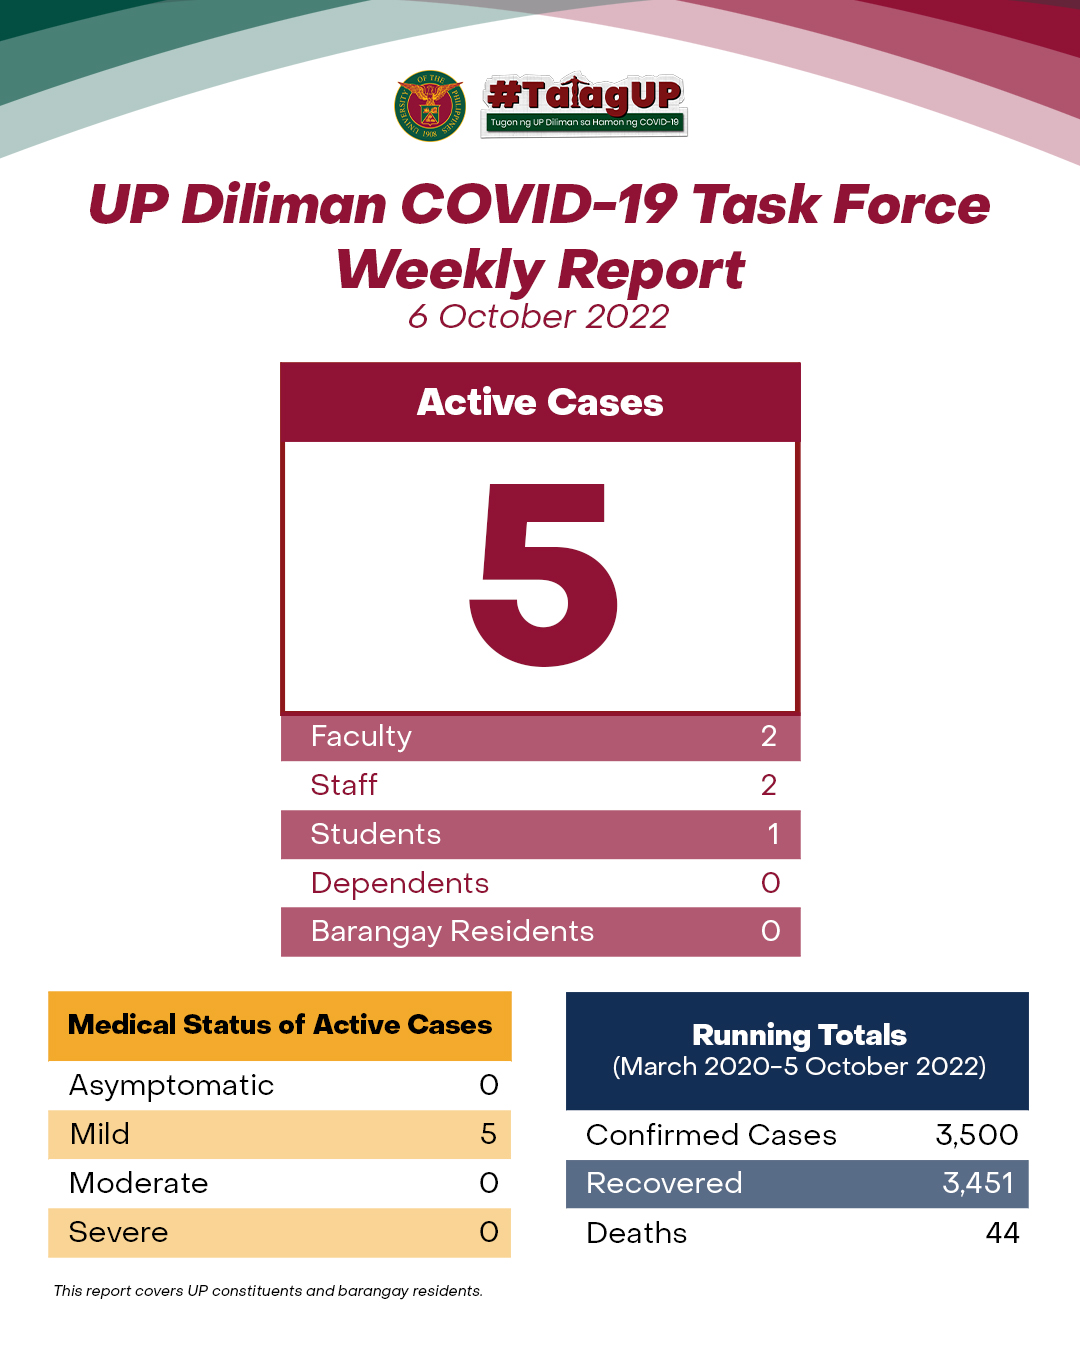 UP Diliman COVID-19 Task Force Weekly Report (6 October 2022)